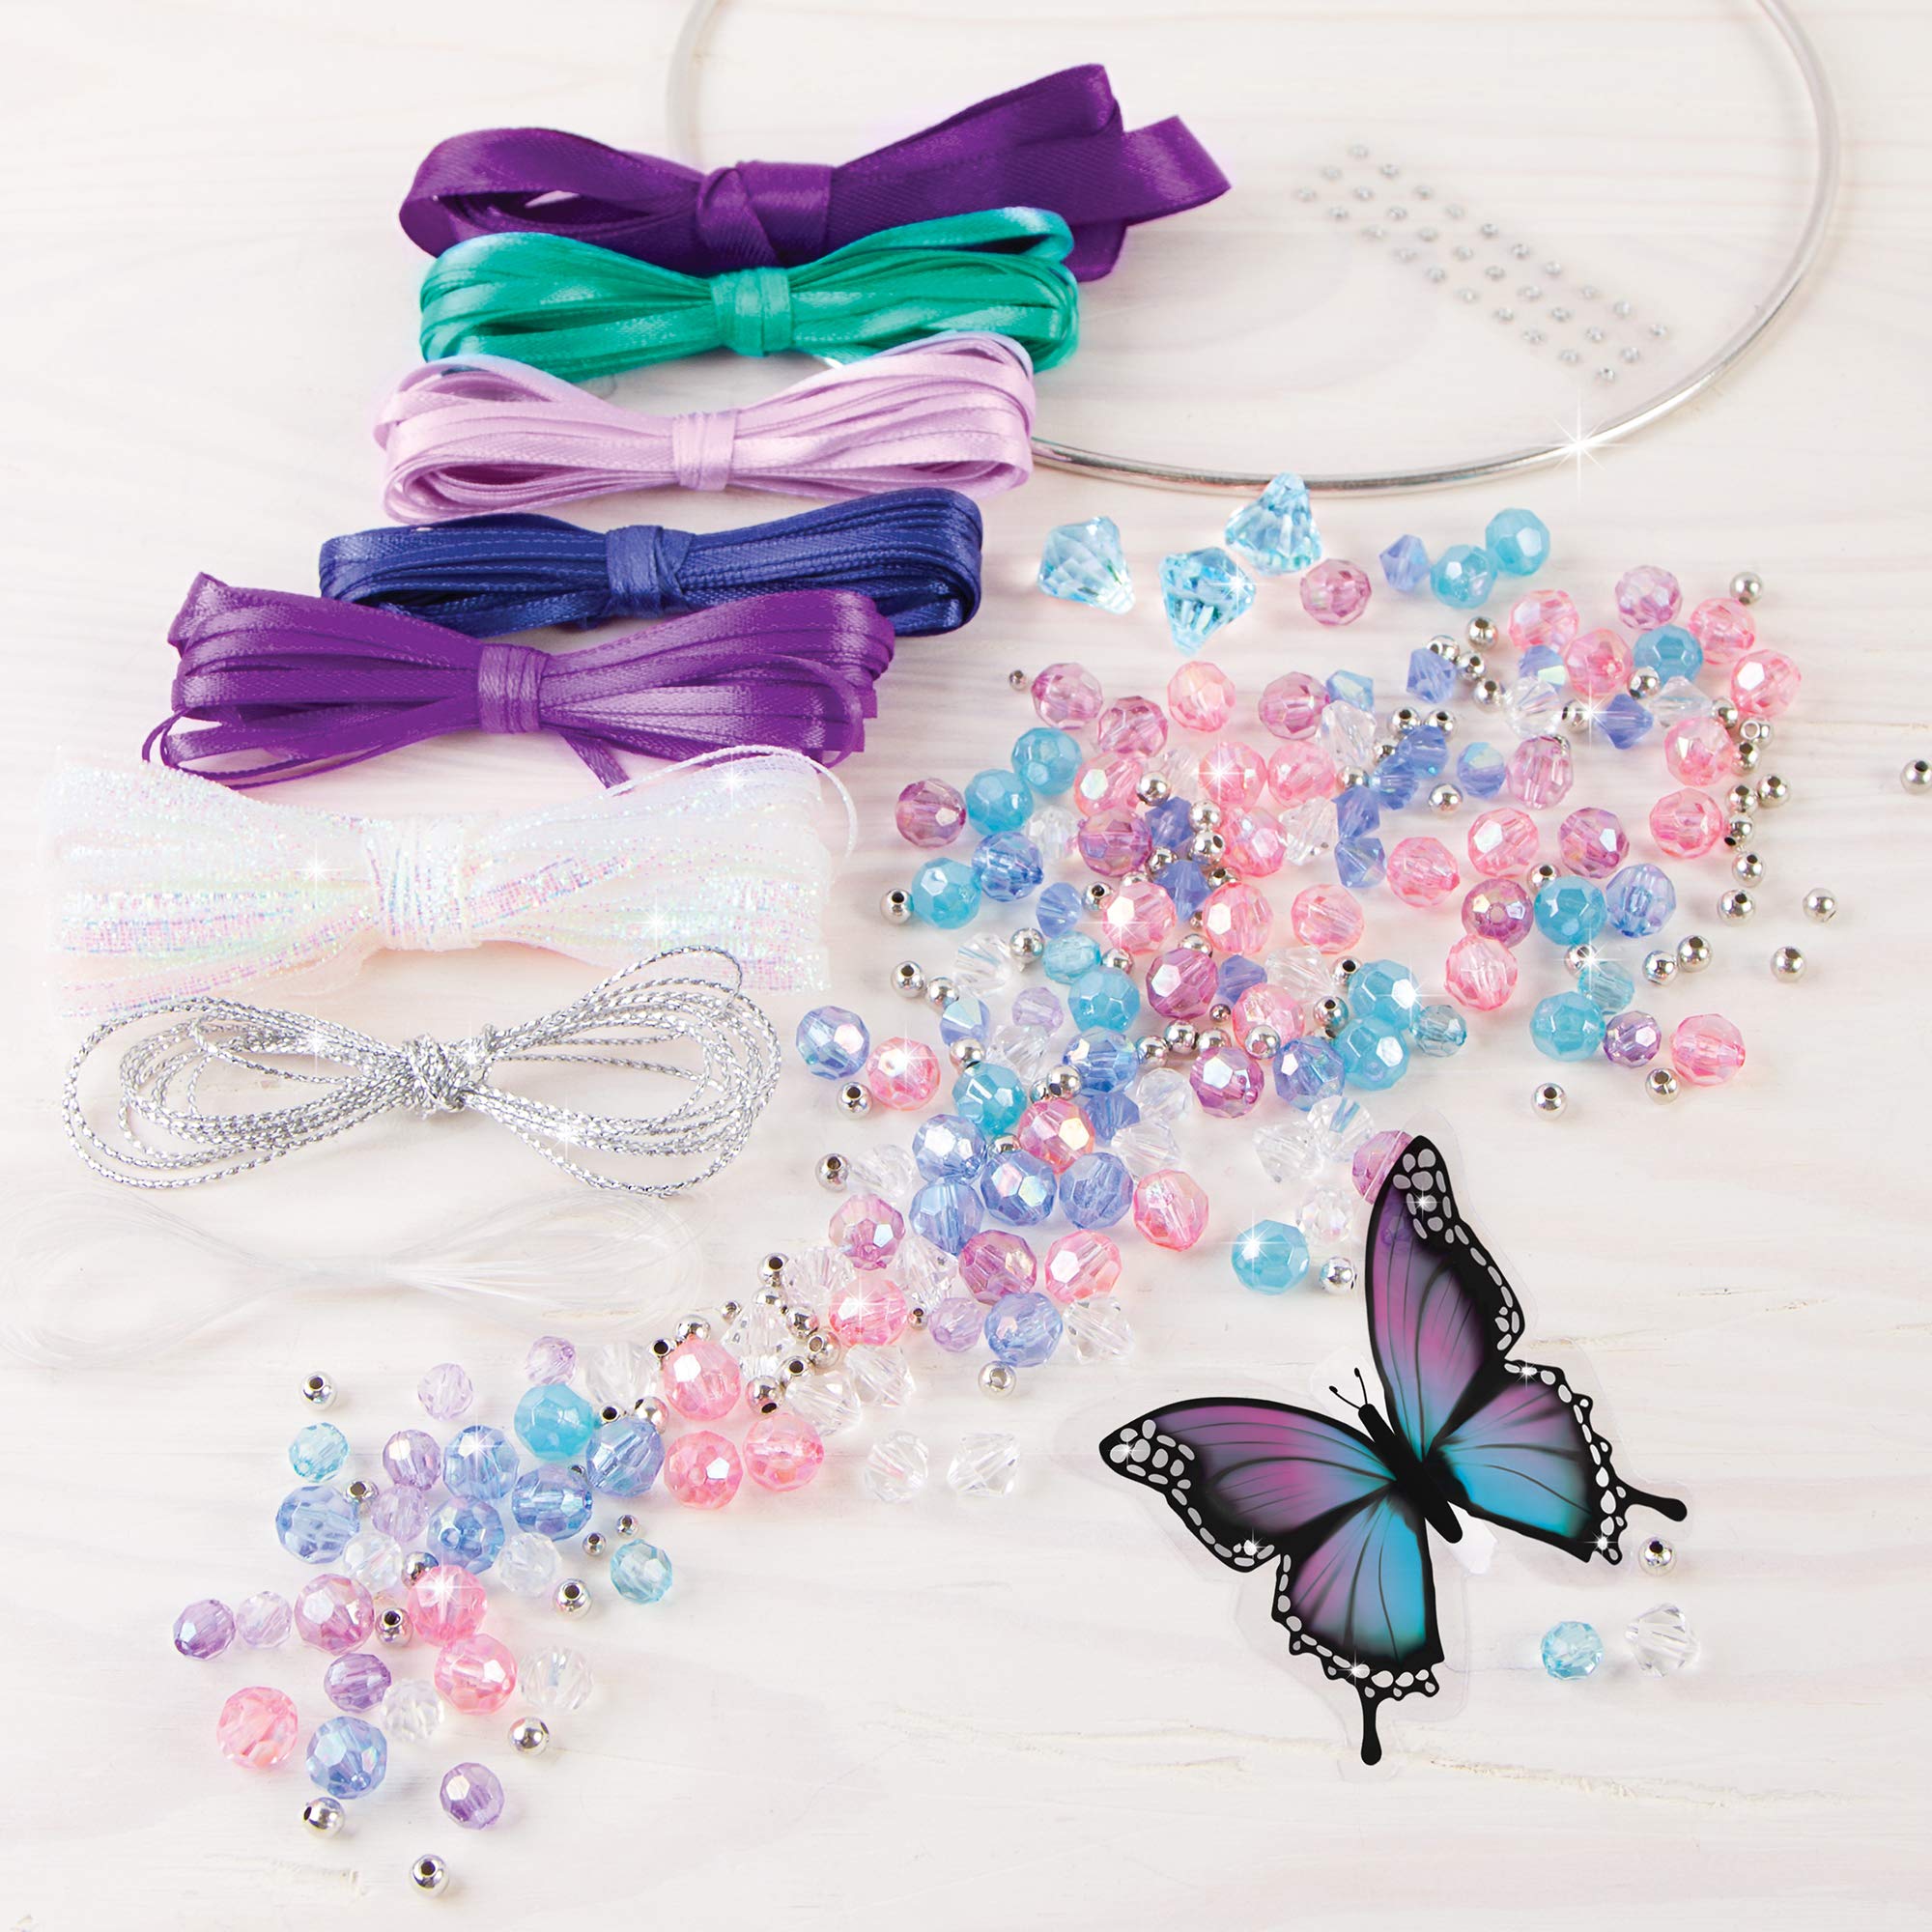 Make It Real: DIY Dreamcatcher - Purple Pink Blue Butterfly, 175 Piece All-in-One DIY Kit, Tweens & Girls, Bedroom Décor, Arts & Crafts, Make A Beautiful Hanging Bead Dreamcatcher, Kids Ages 8+